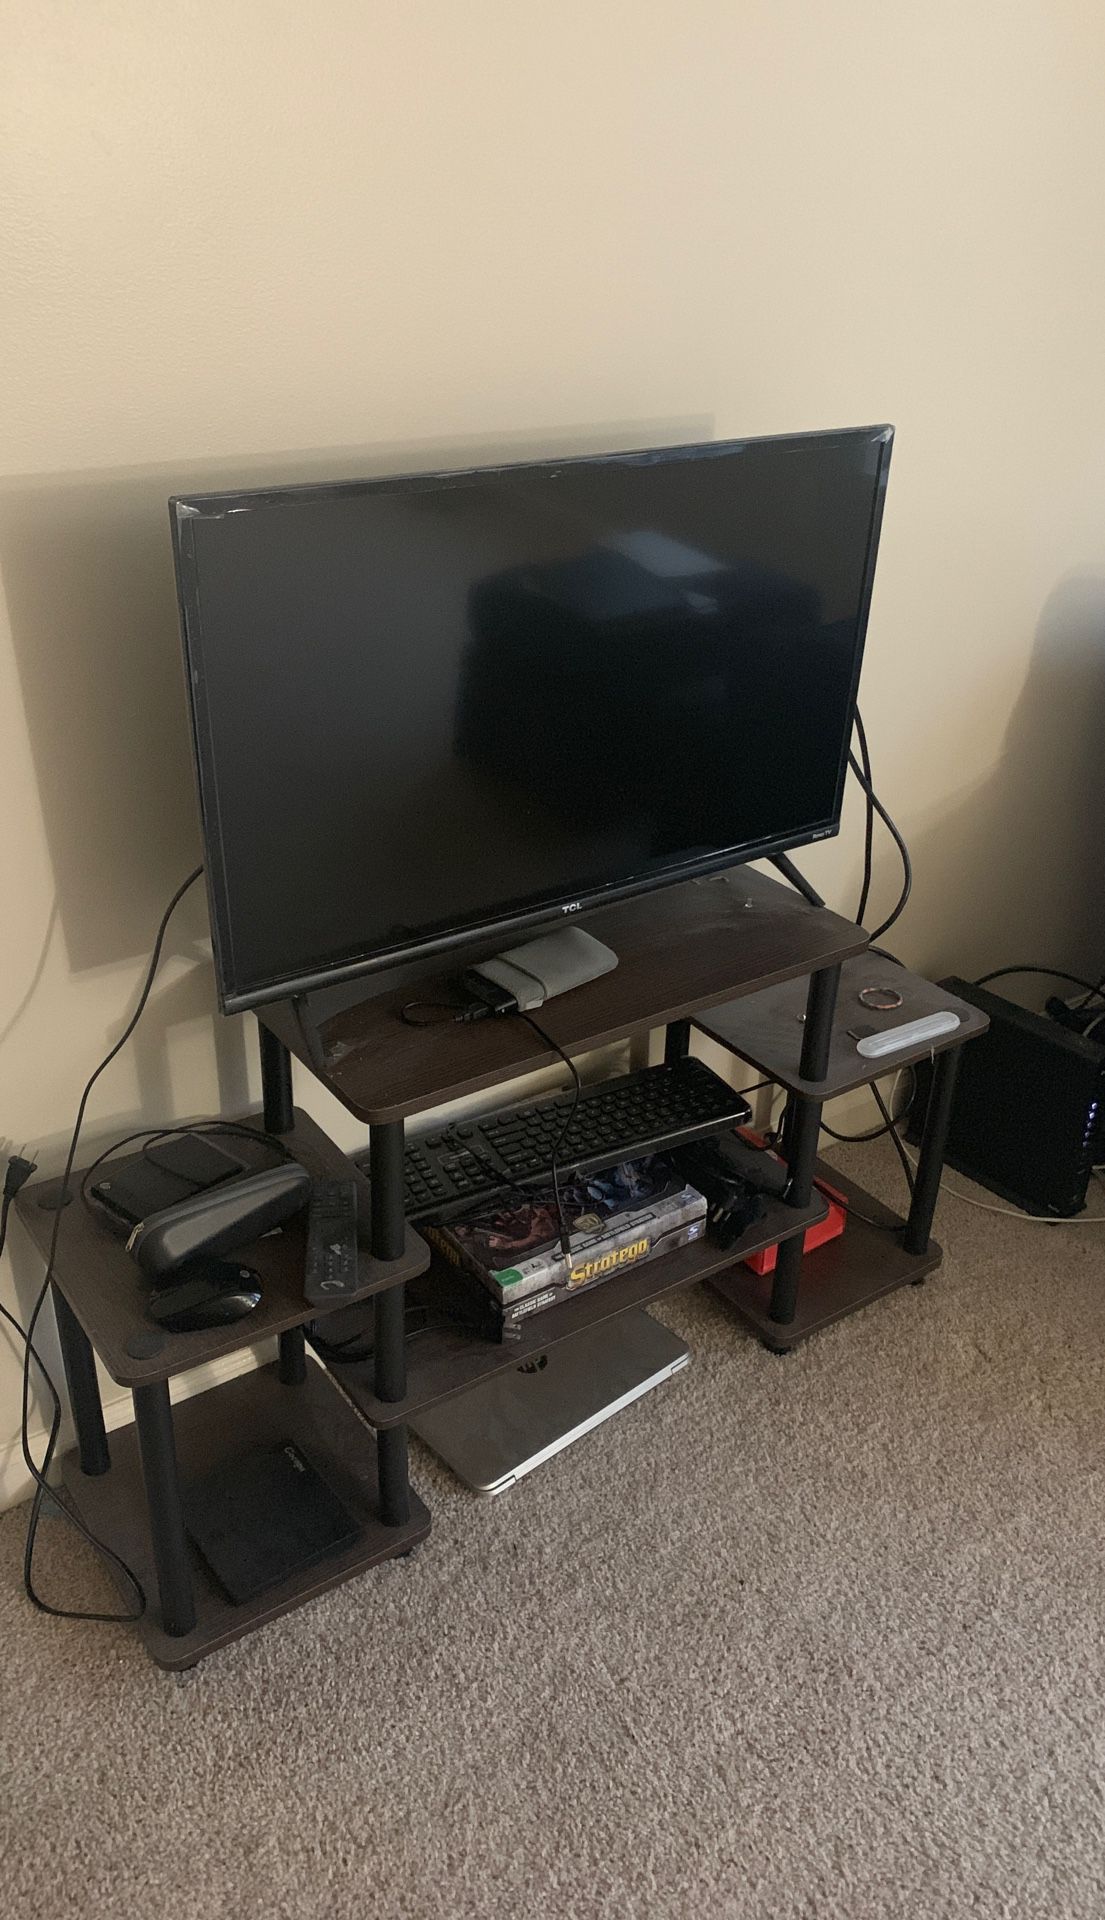 Selling TCL 32 inch 1080p Roku Smart LED TV. Along with it, comes dark brown detachable TV stand